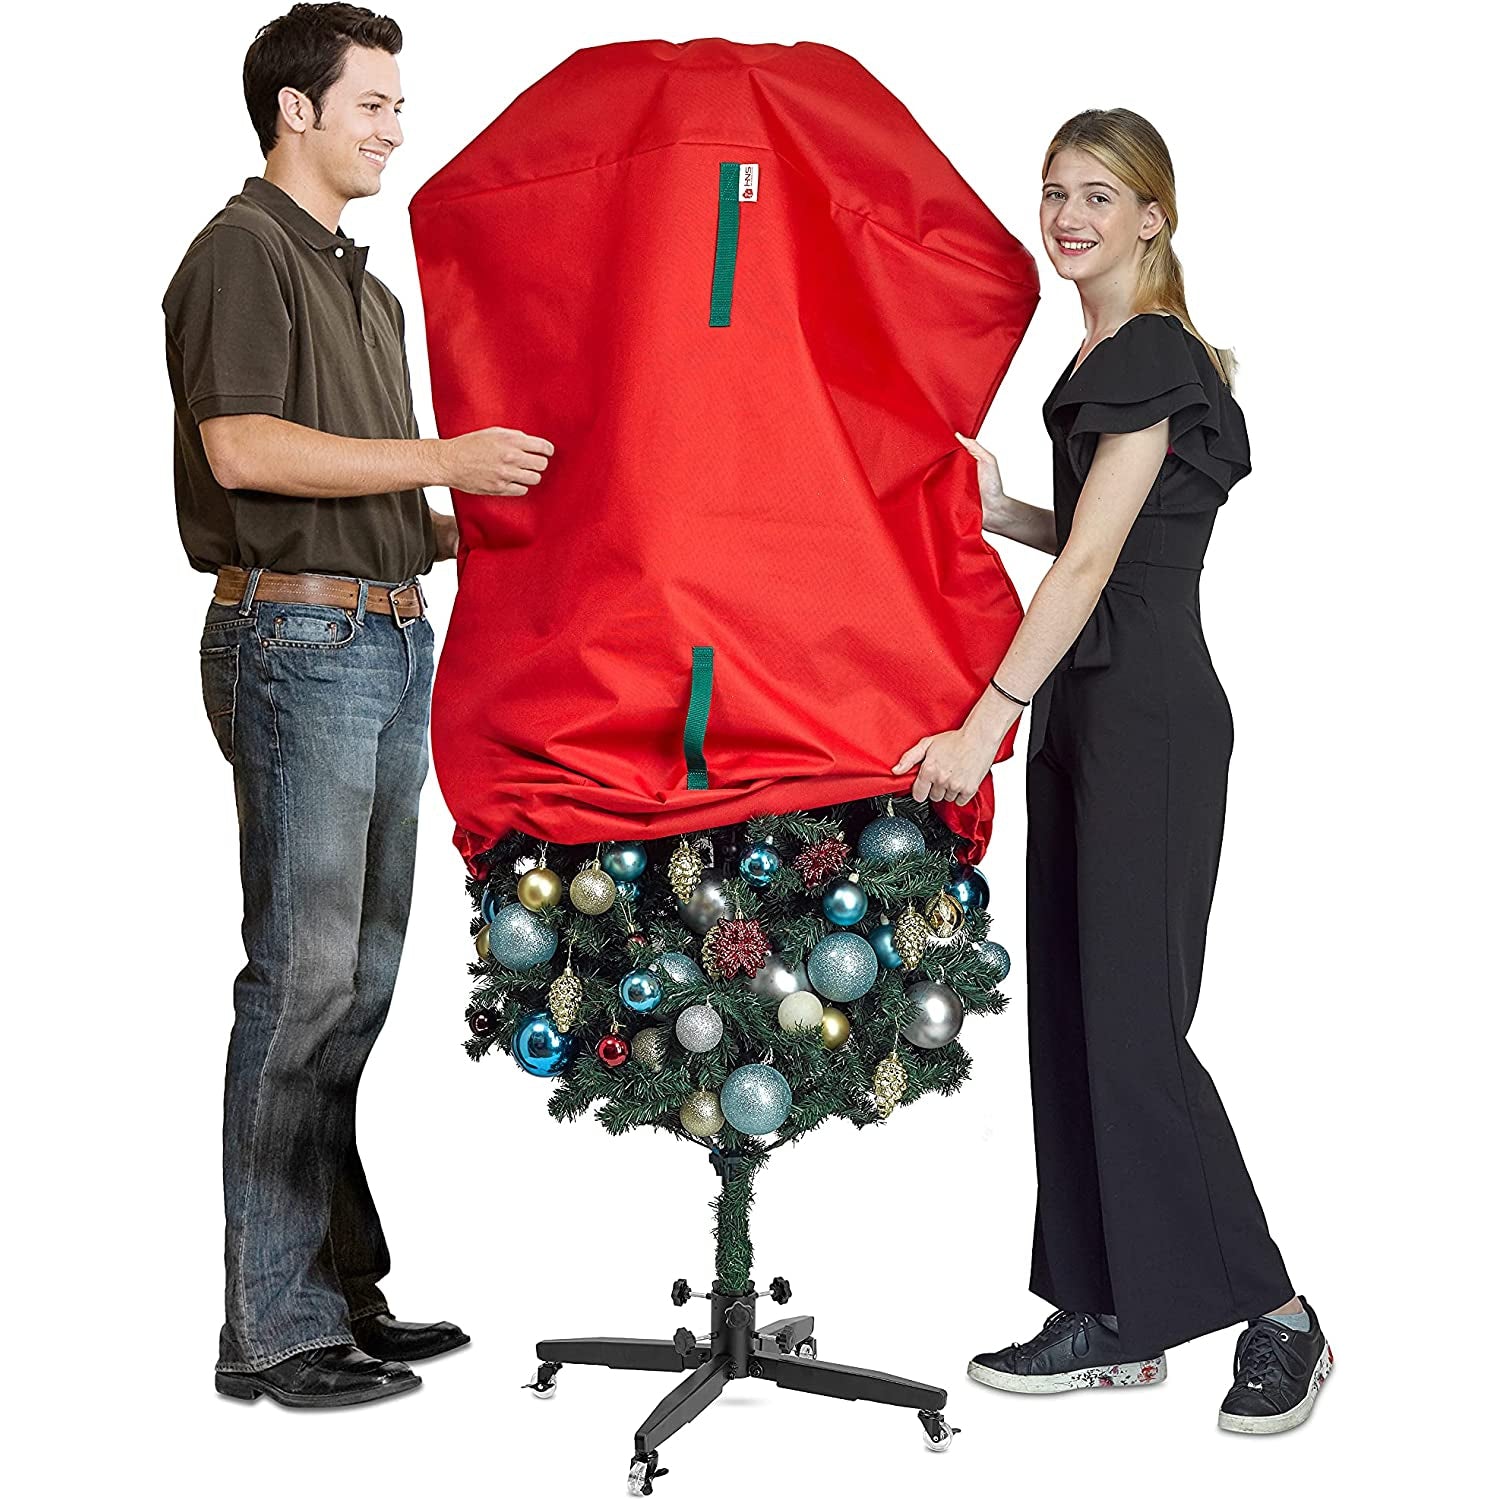 Christmas Tree Storage Bag – Premium Christmas Tree Cover Upright –  Tear Resistant 600D Material -Artificial Assembled topiary and Regular Trees, No Need to Remove all Decorations - Drawstring Hem